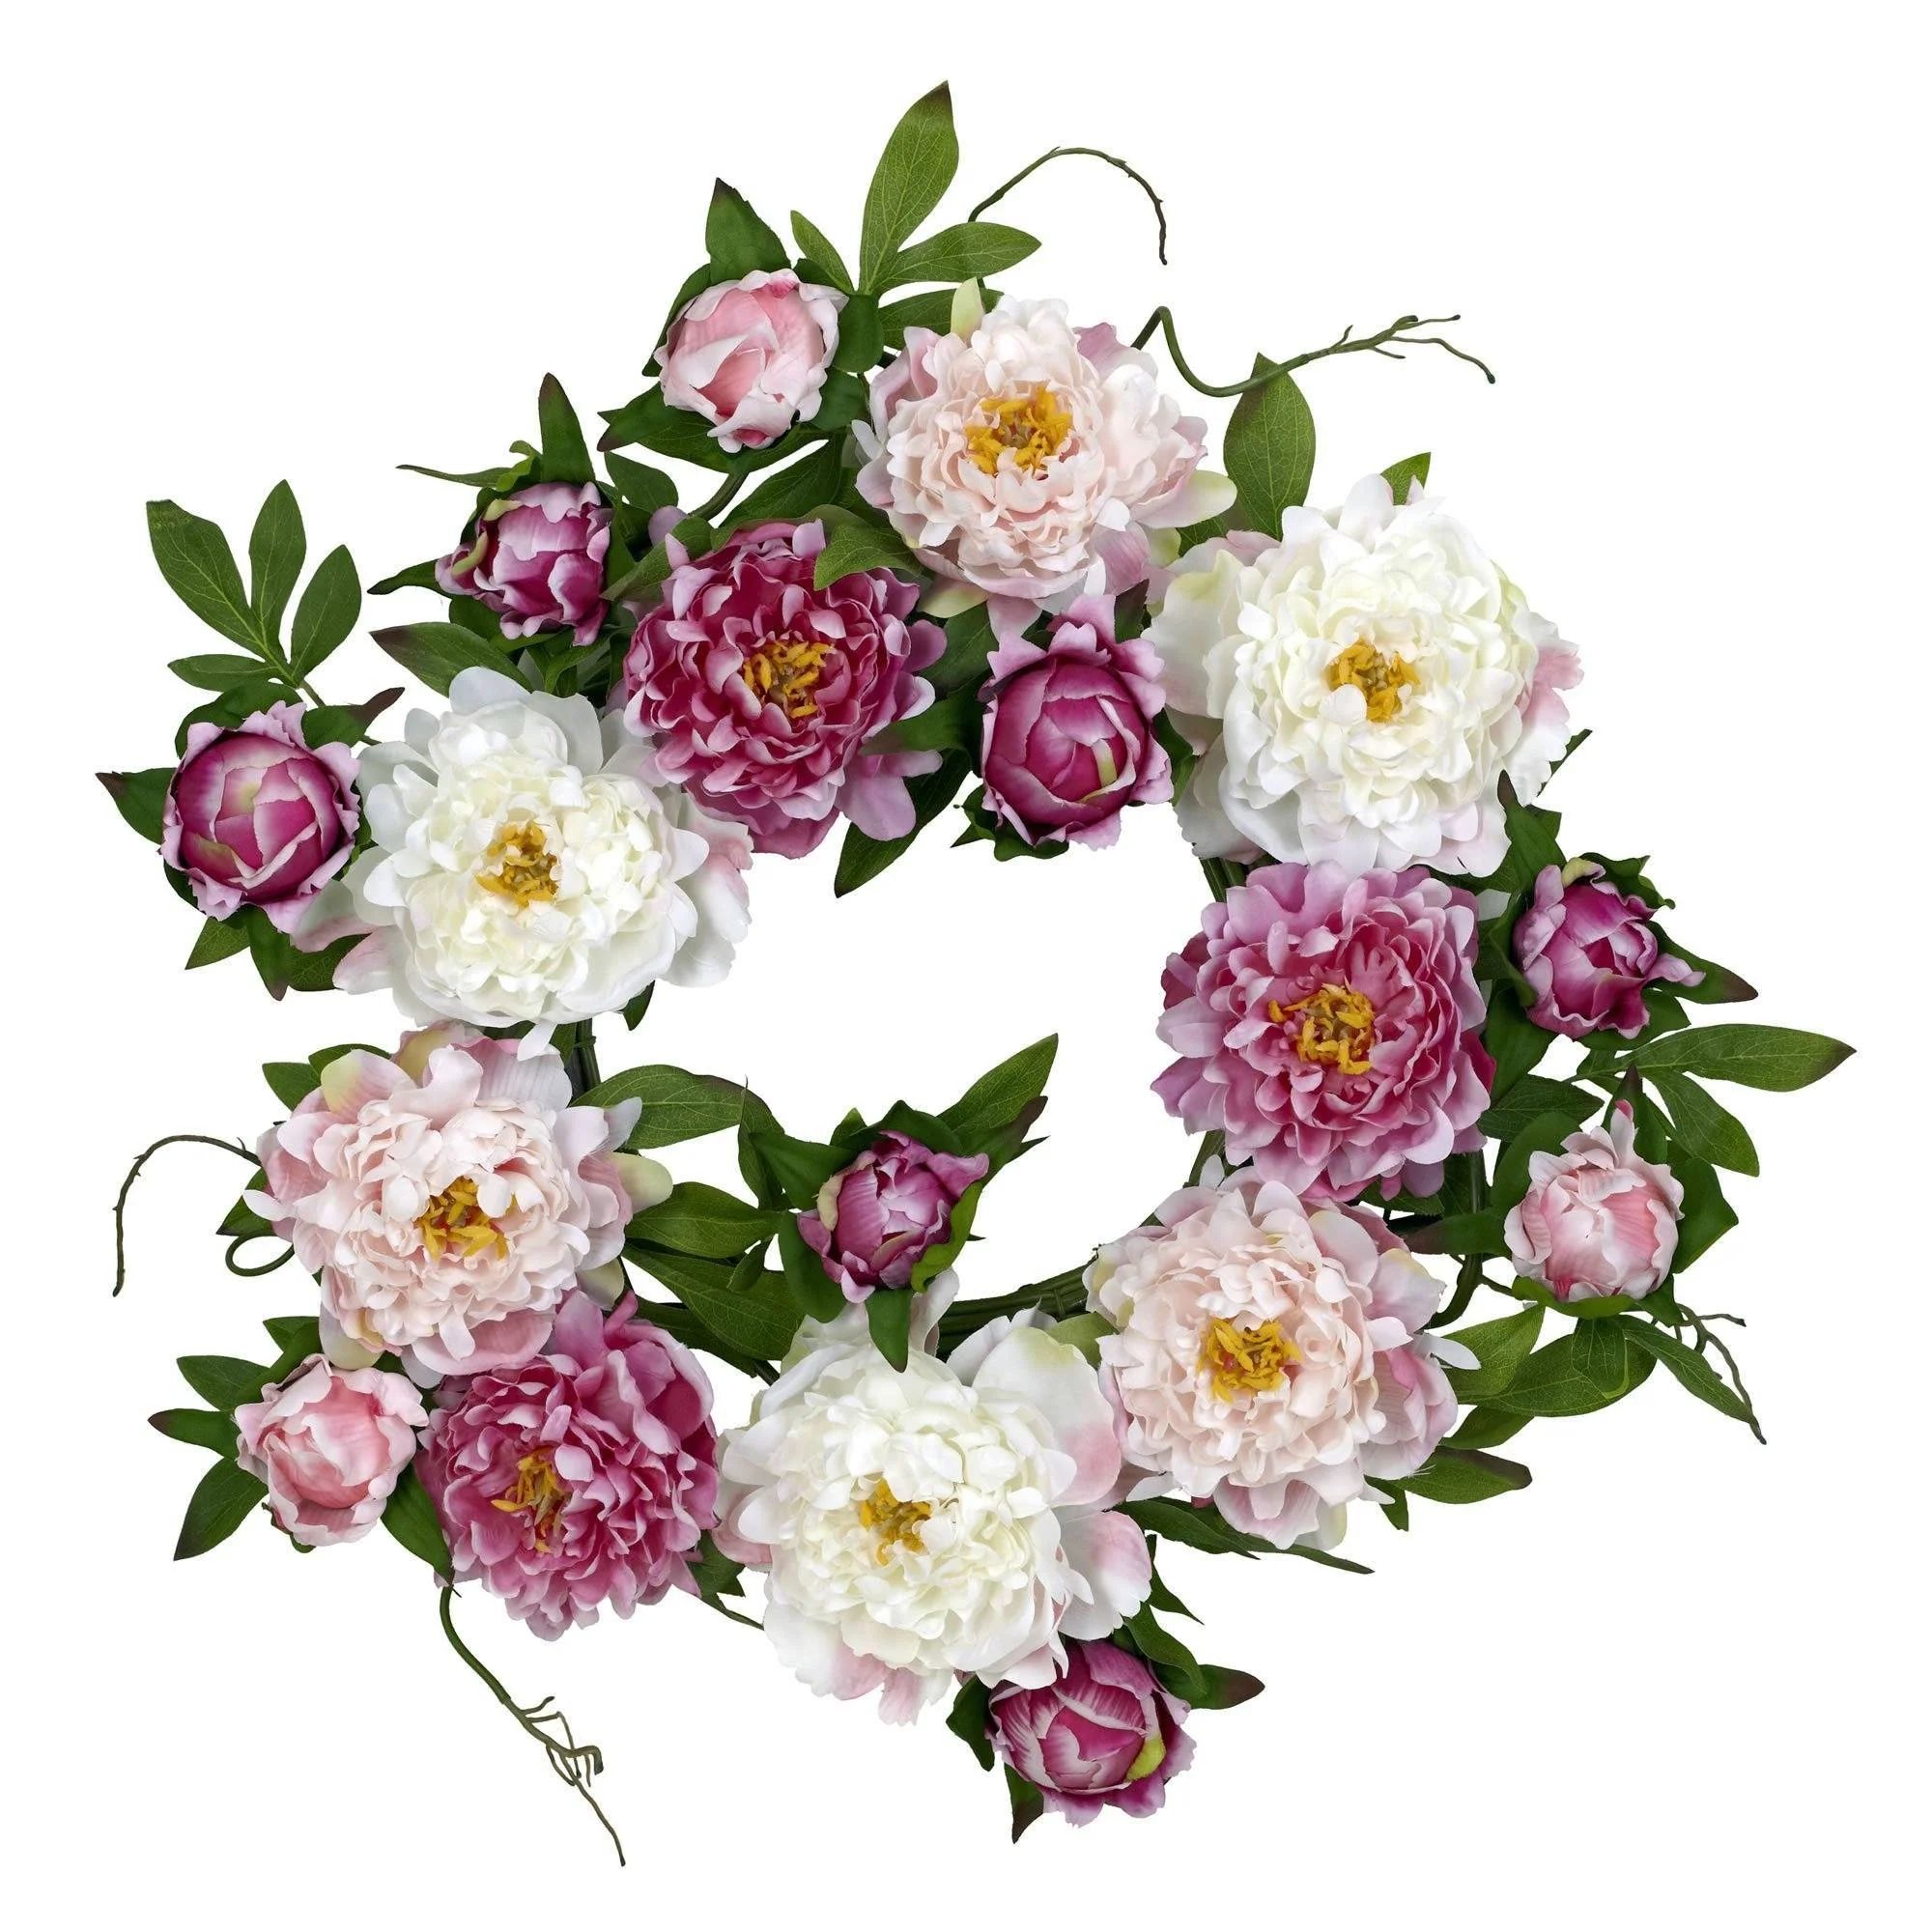 22" Peony Wreath | Nearly Natural" | Nearly Natural